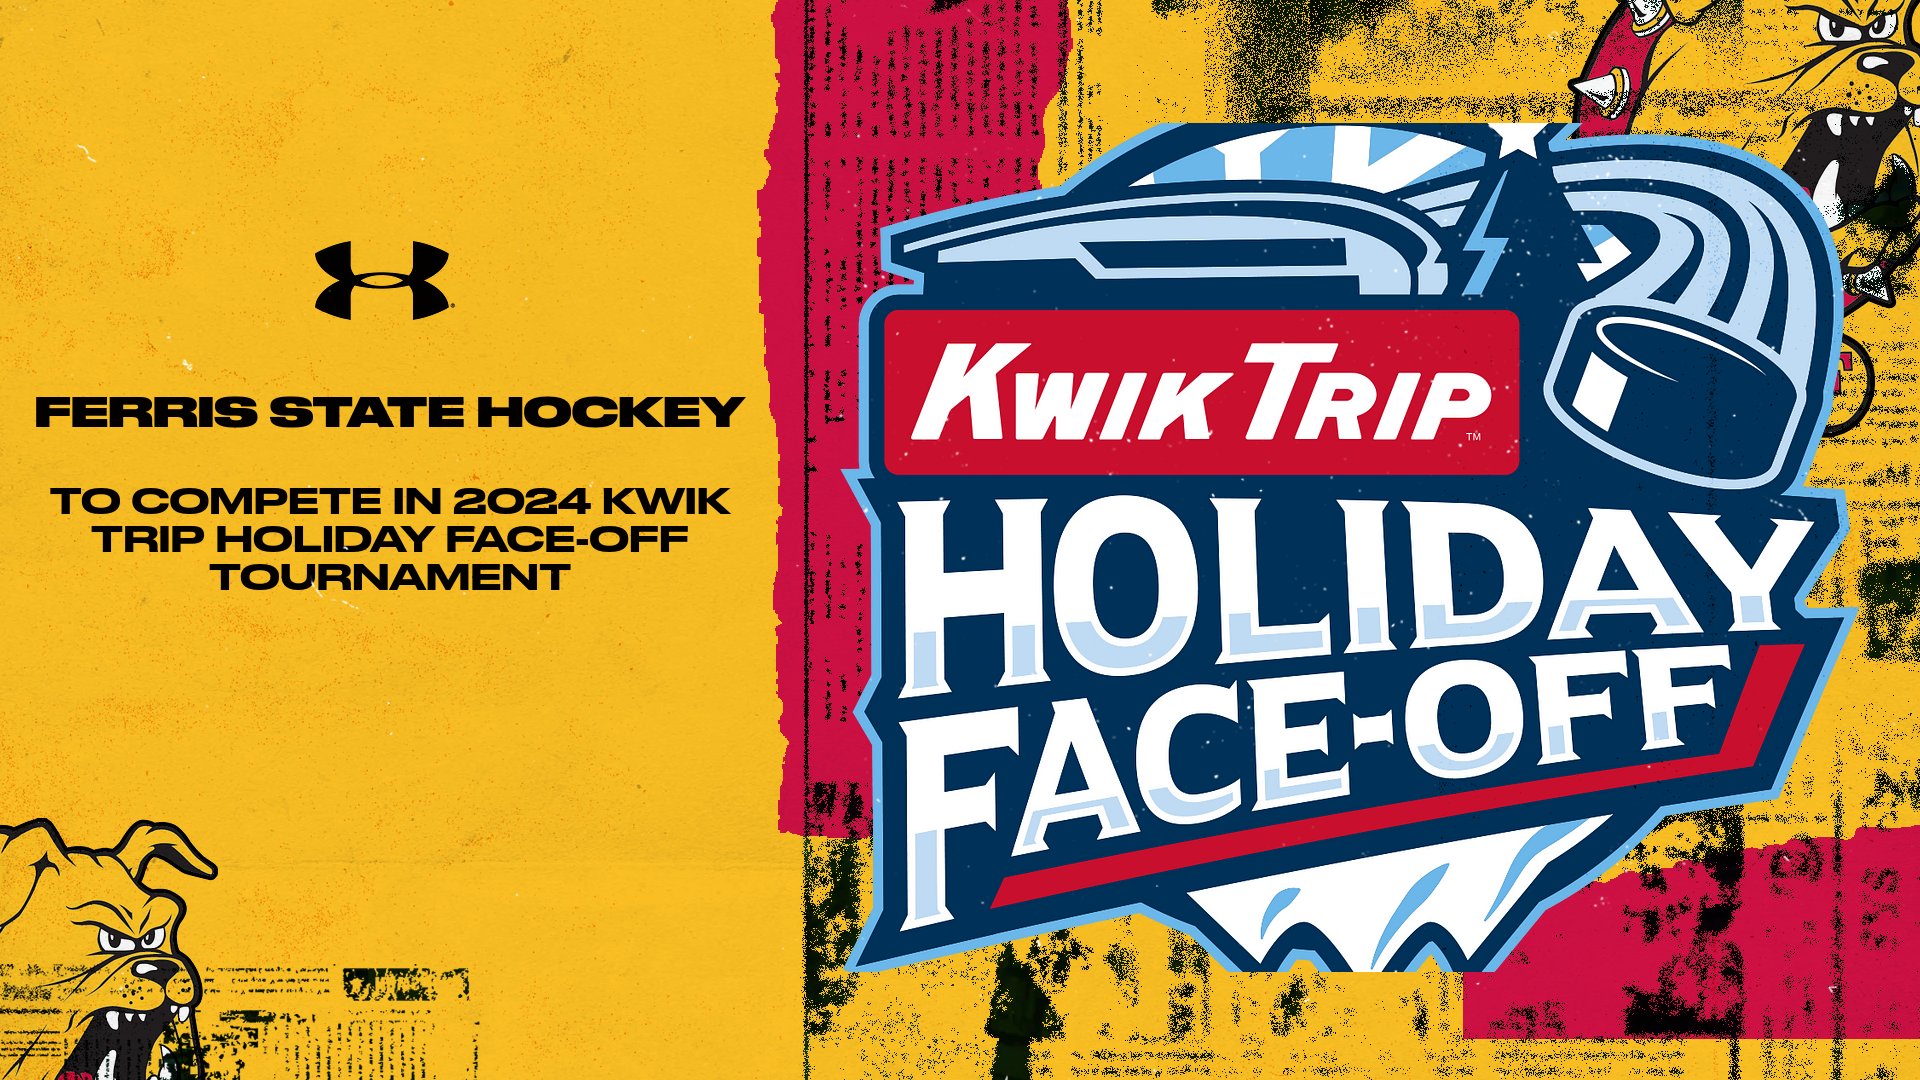 Ferris State Hockey to Compete in Kwik Trip Holiday Face-Off In 2024